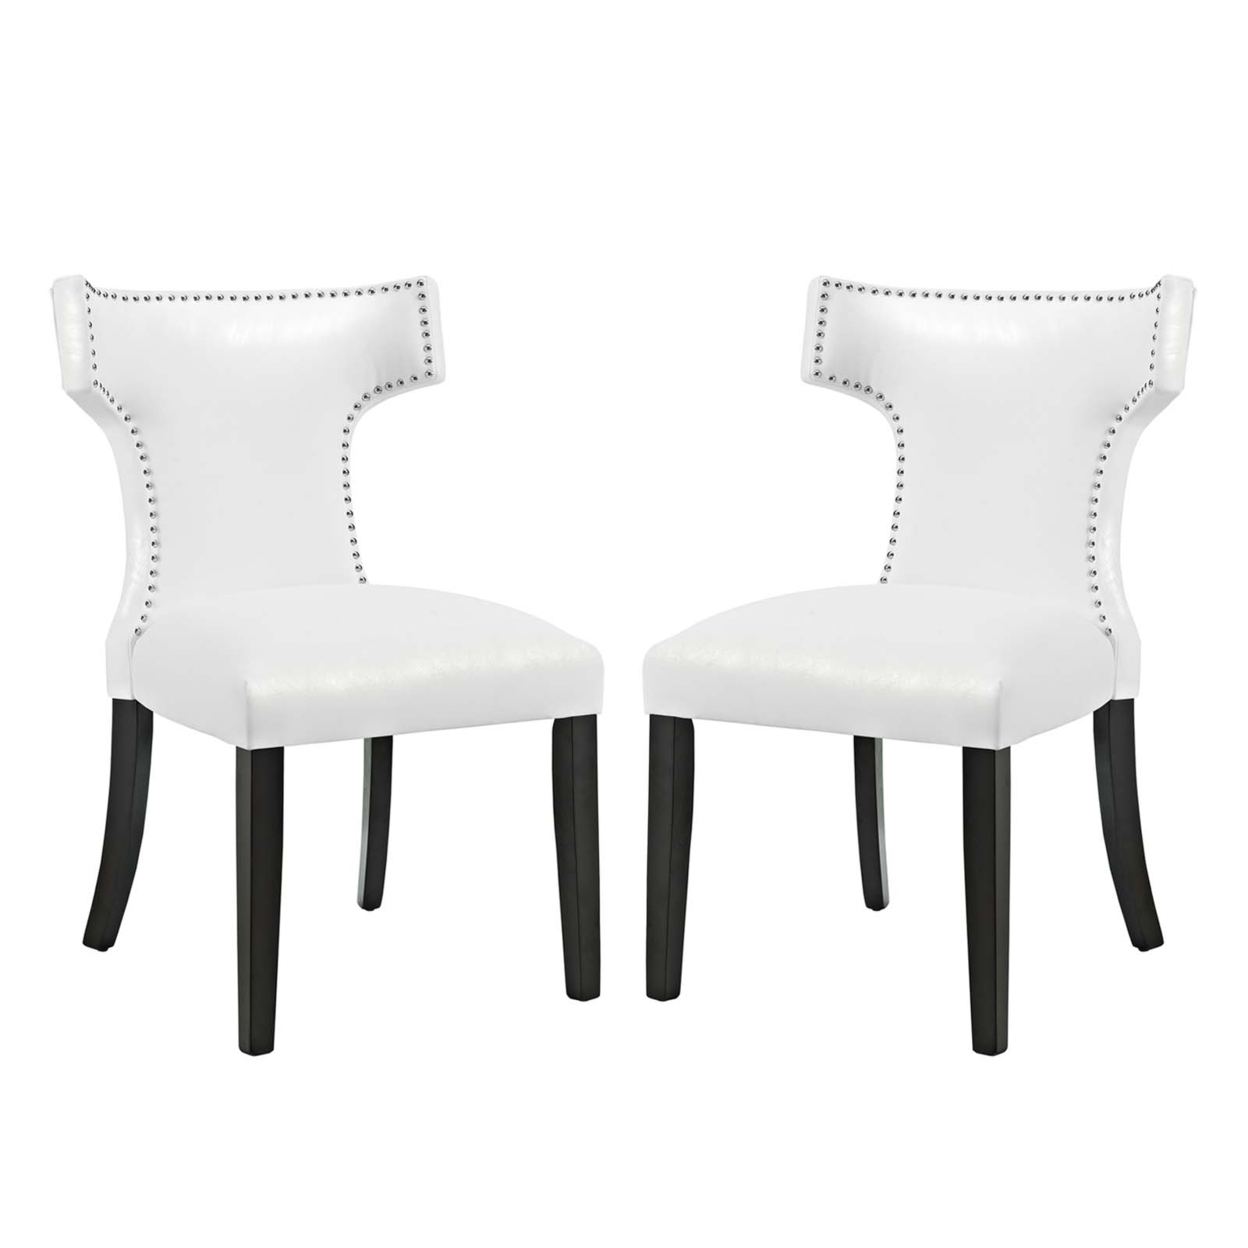 Curve Dining Chair Vinyl Set Of 2,White